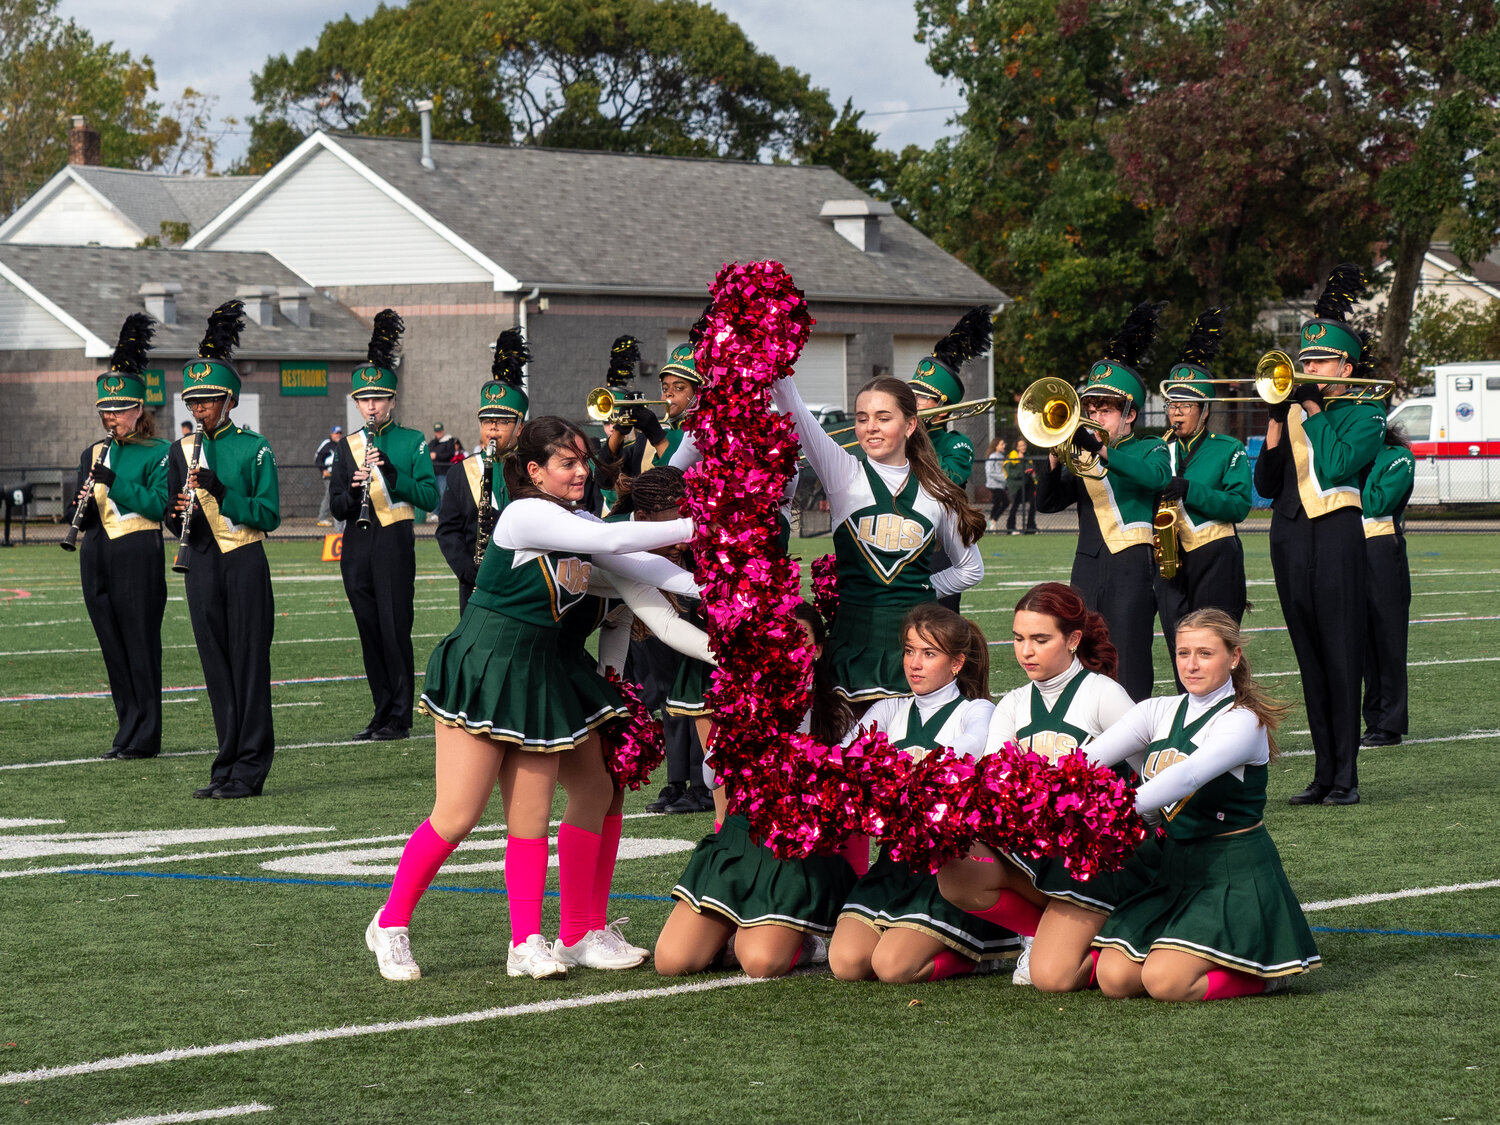 Cheerleaders created a large ‘L’ for Lynbrook while the marching band performed during halftime.